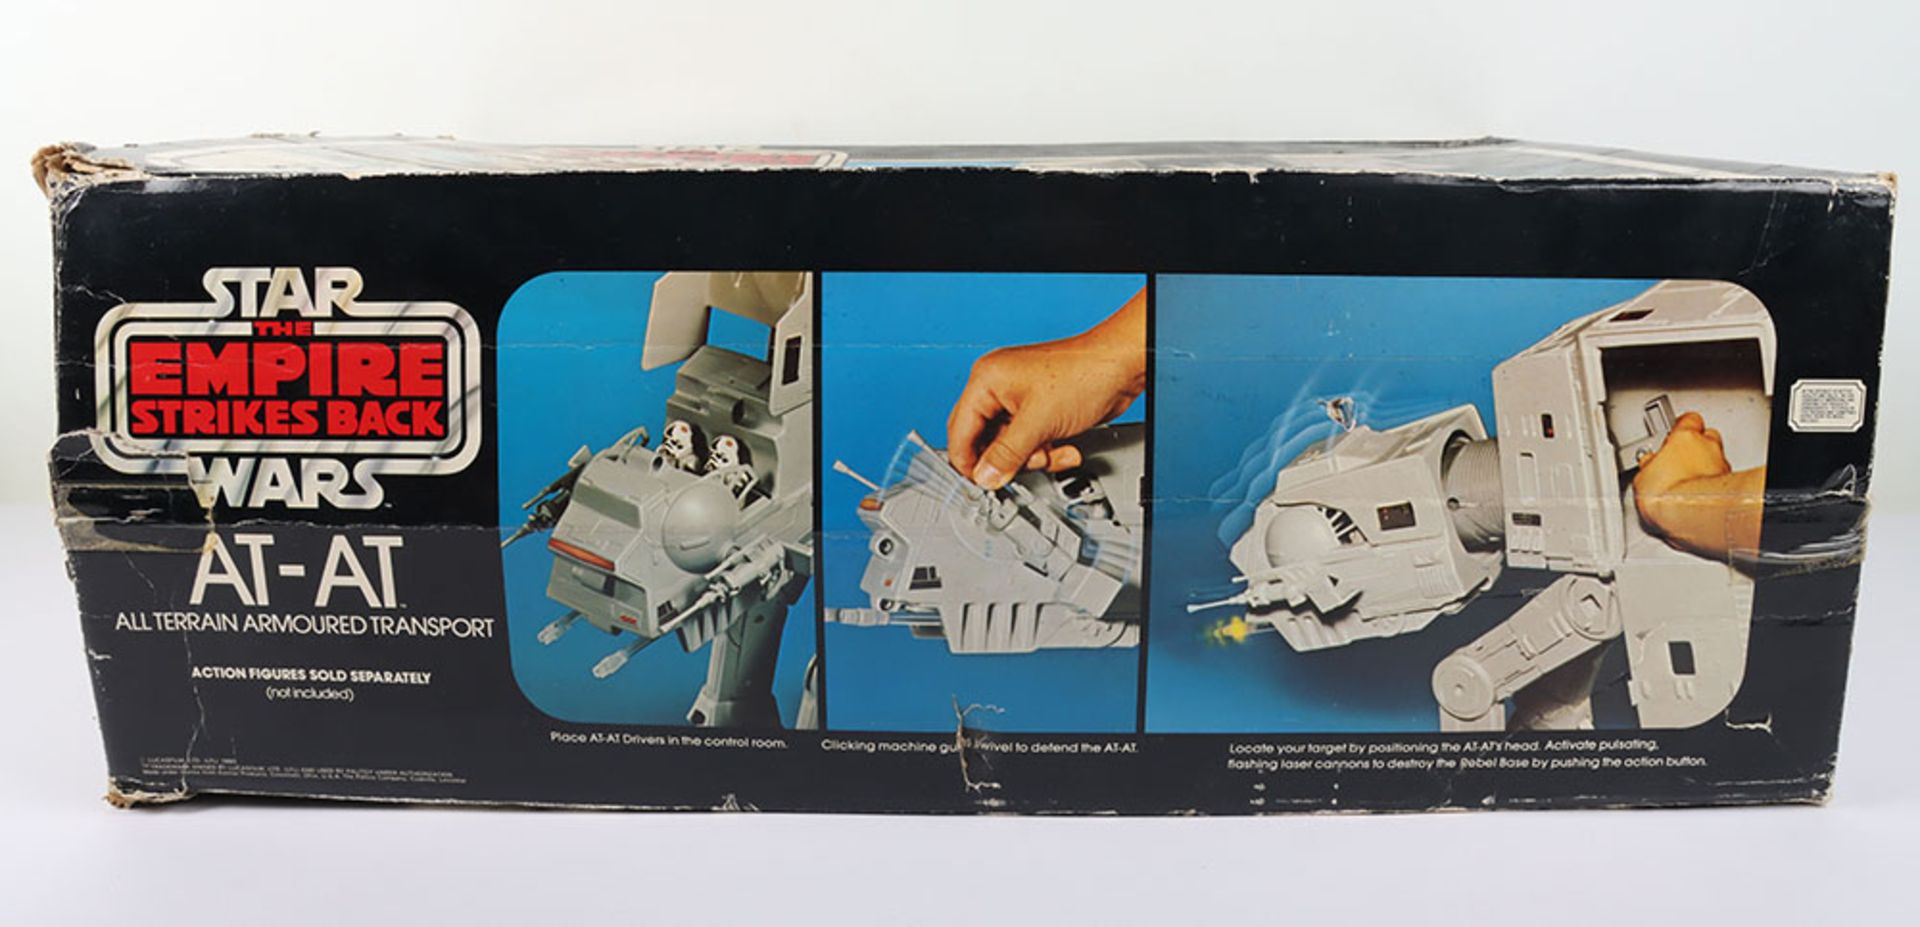 Palitoy Vintage Boxed Star Wars ‘The Empire Strikes Back’ AT-AT All Terrain Armoured Transport - Image 7 of 10